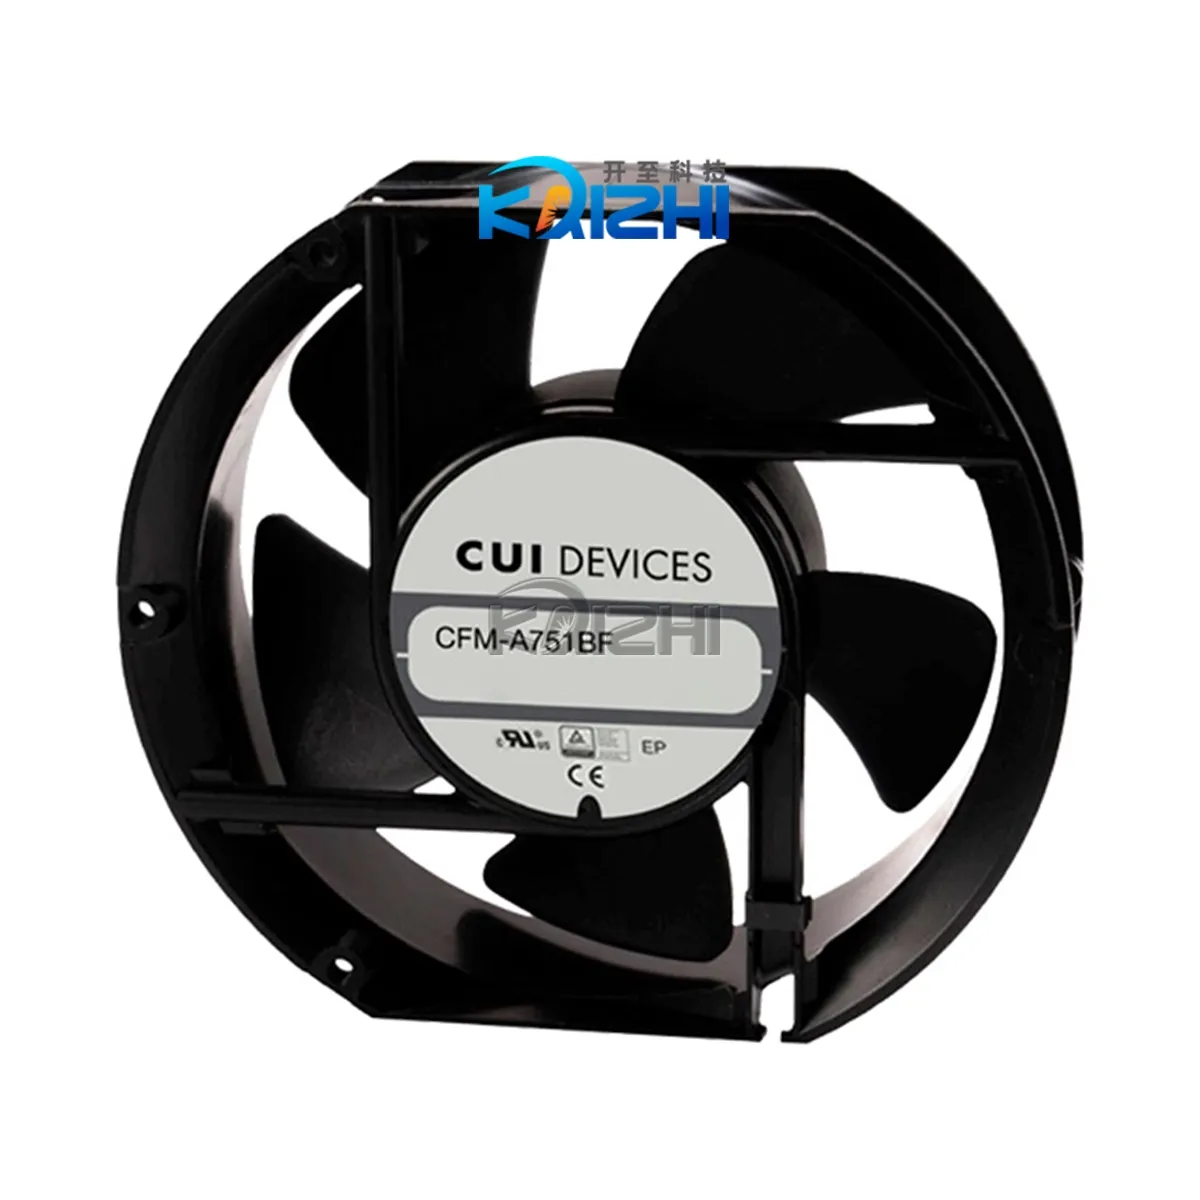 IN STOCK ORIGINAL BRAND FAN AXIAL 172X51.5MM 12VDC WIRE CFM-A751BF-135-533-22